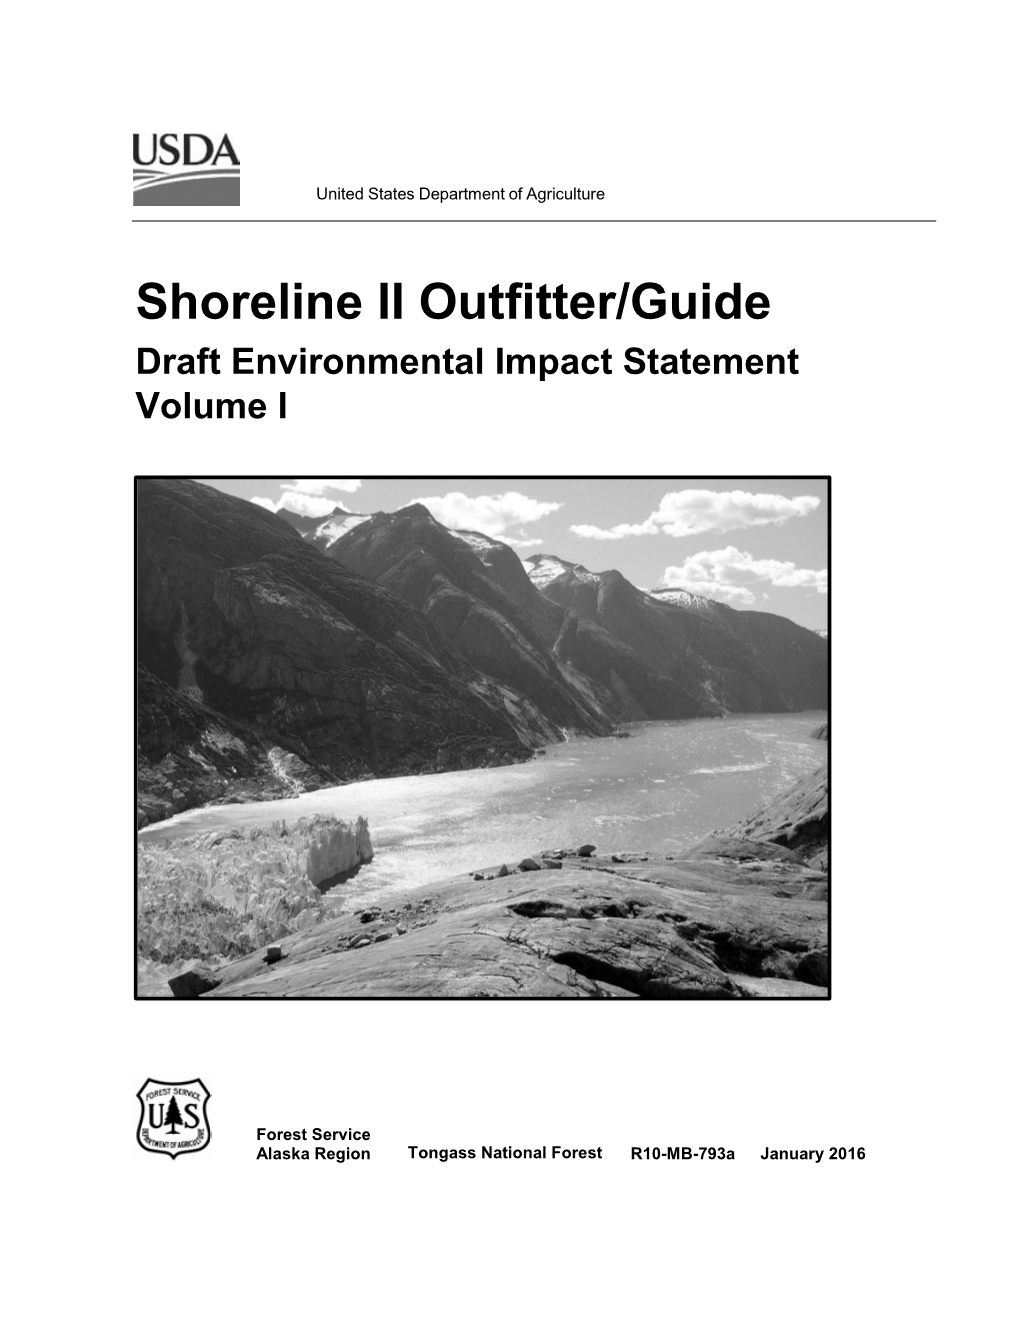 Shoreline II Outfitter/Guide Draft Environmental Impact Statement Volume I